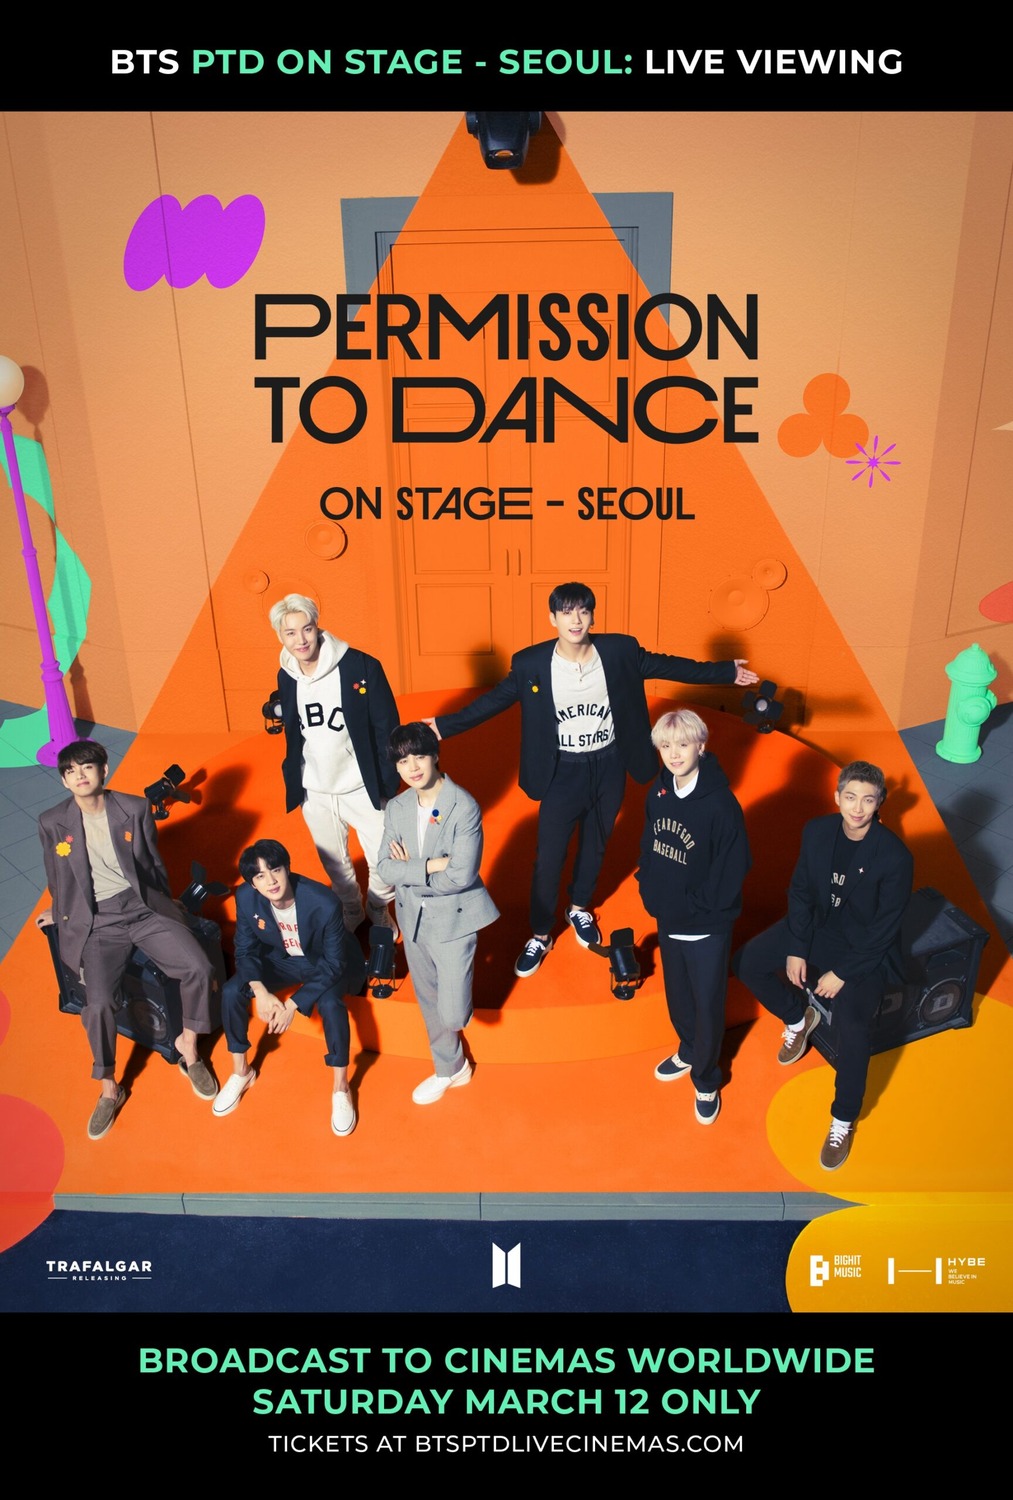 Extra Large Movie Poster Image for BTS Permission to Dance on Stage - Seoul: Live Viewing 